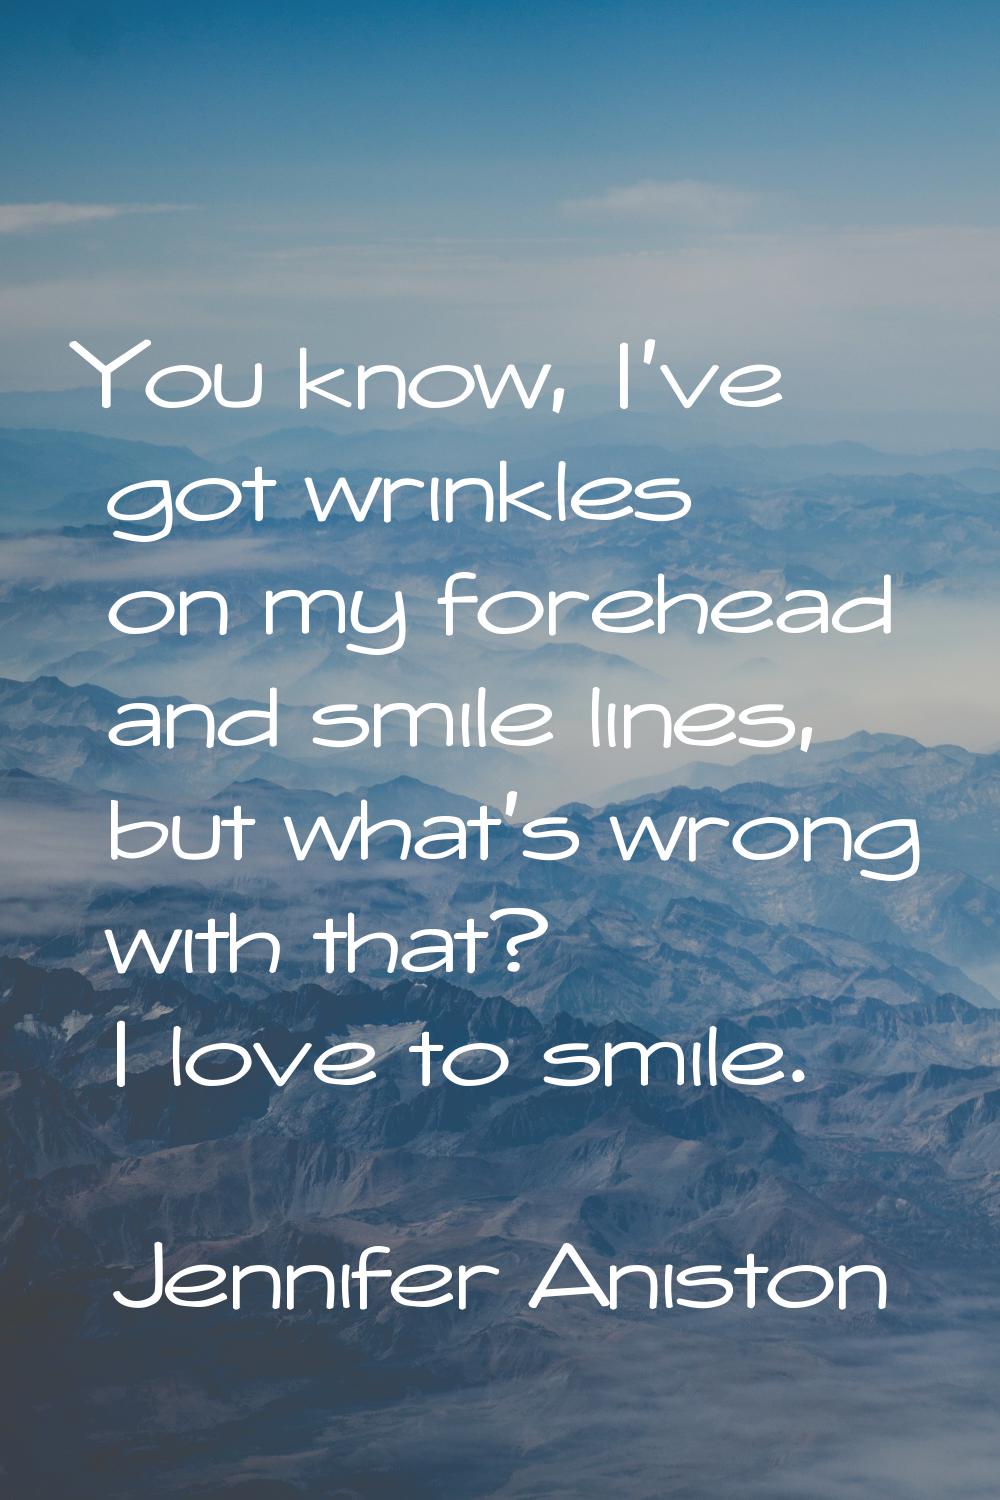 You know, I've got wrinkles on my forehead and smile lines, but what's wrong with that? I love to s